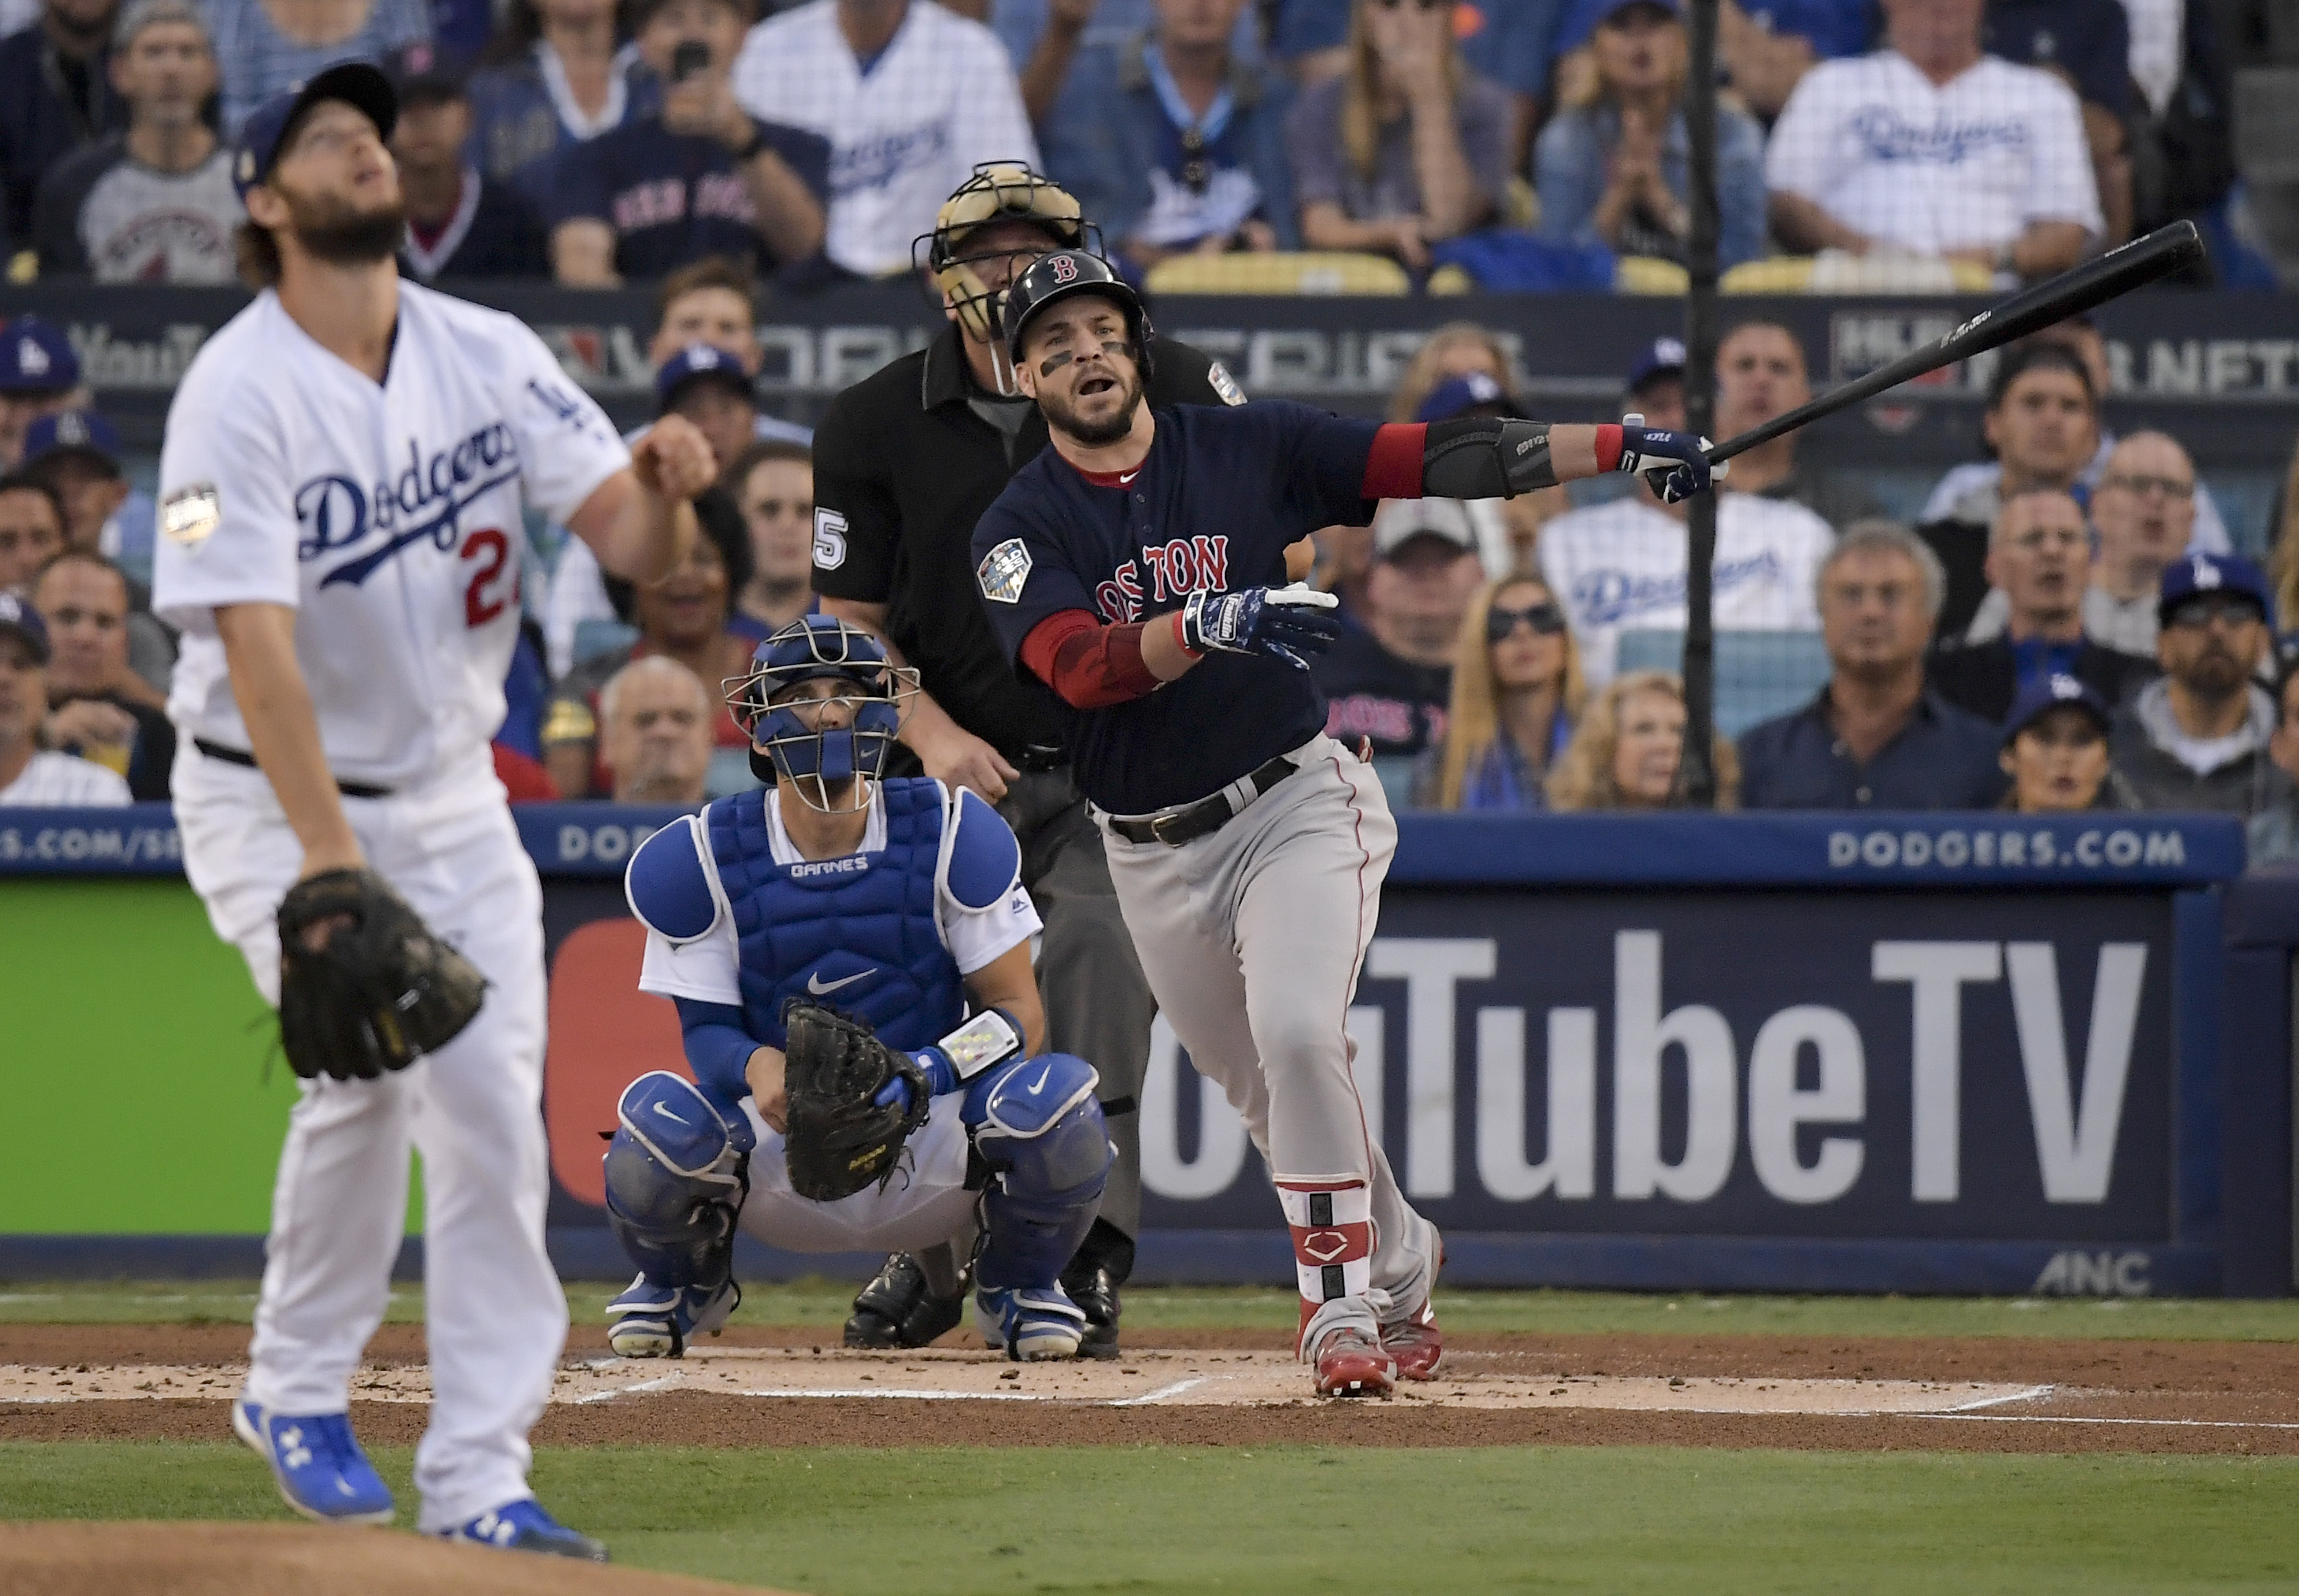 World Series: Red Sox beat Dodgers to win fourth title in 15 years